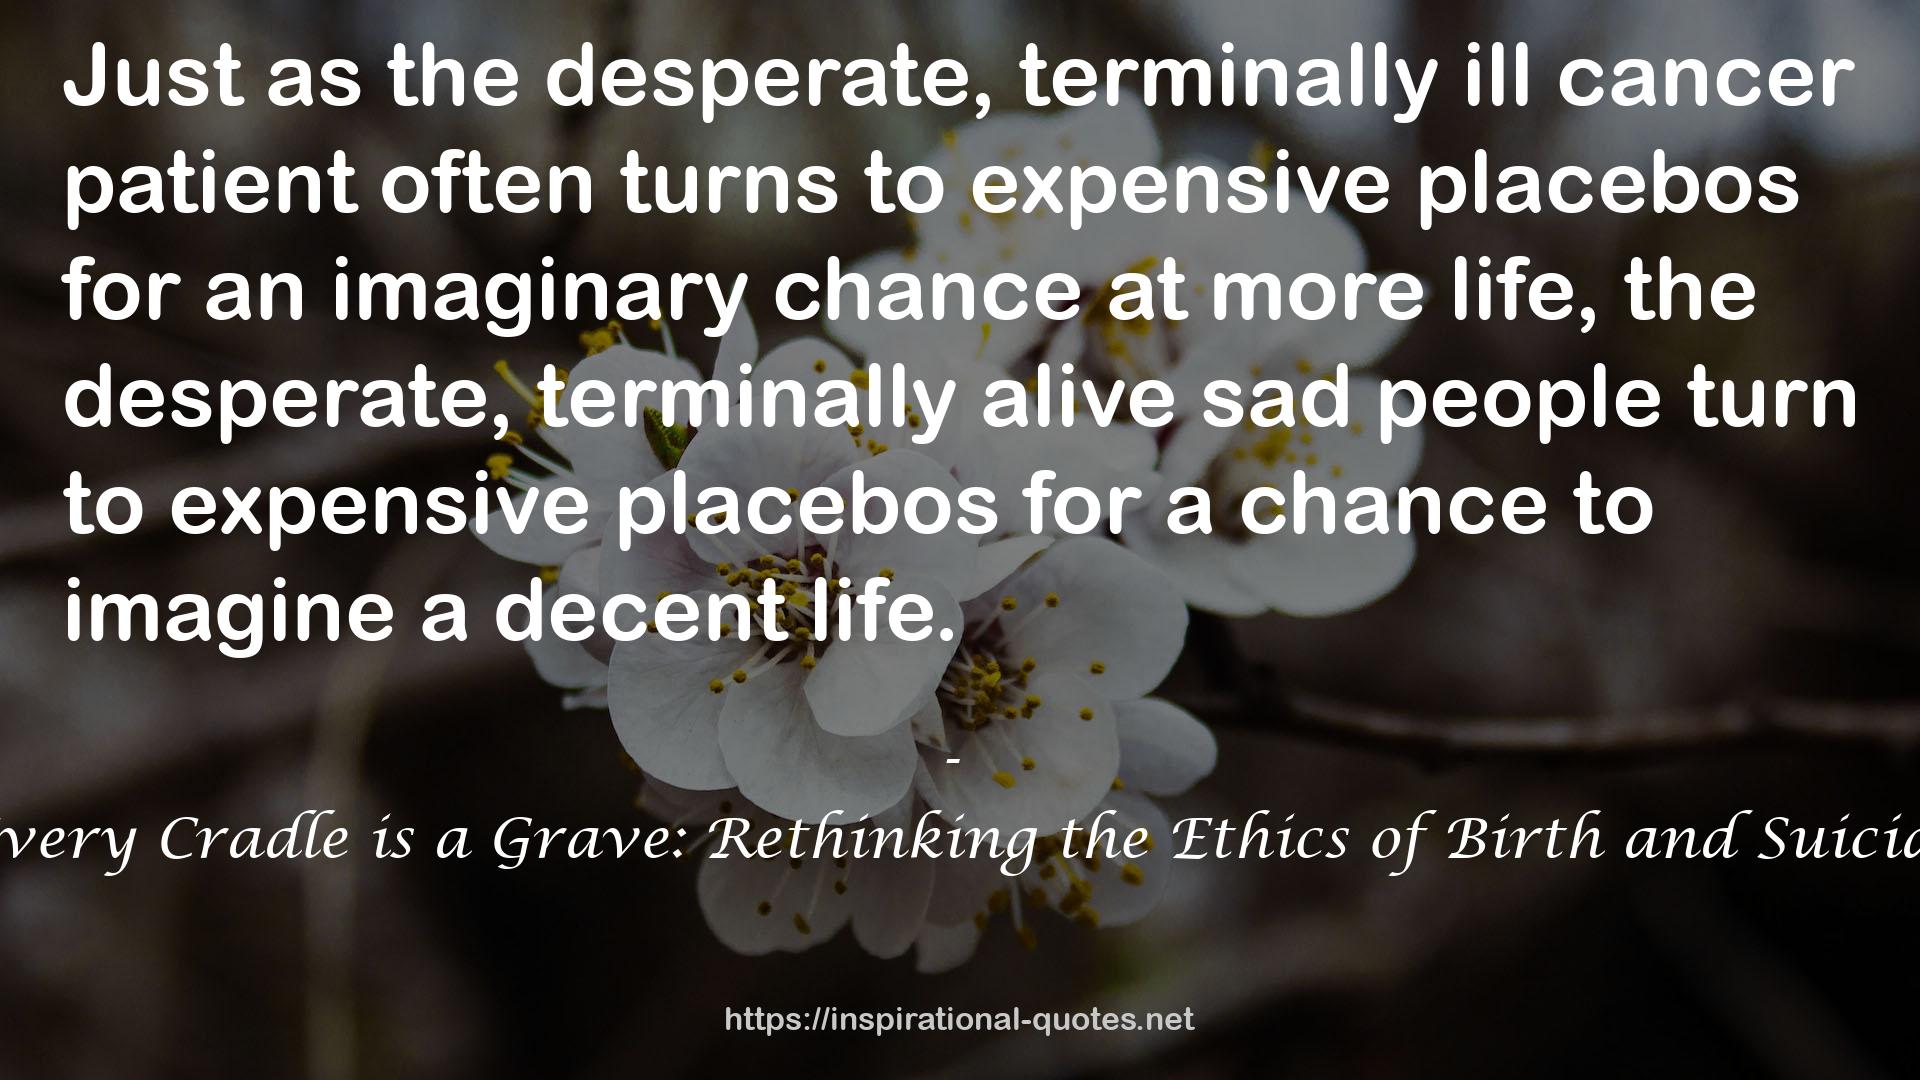 Every Cradle is a Grave: Rethinking the Ethics of Birth and Suicide QUOTES